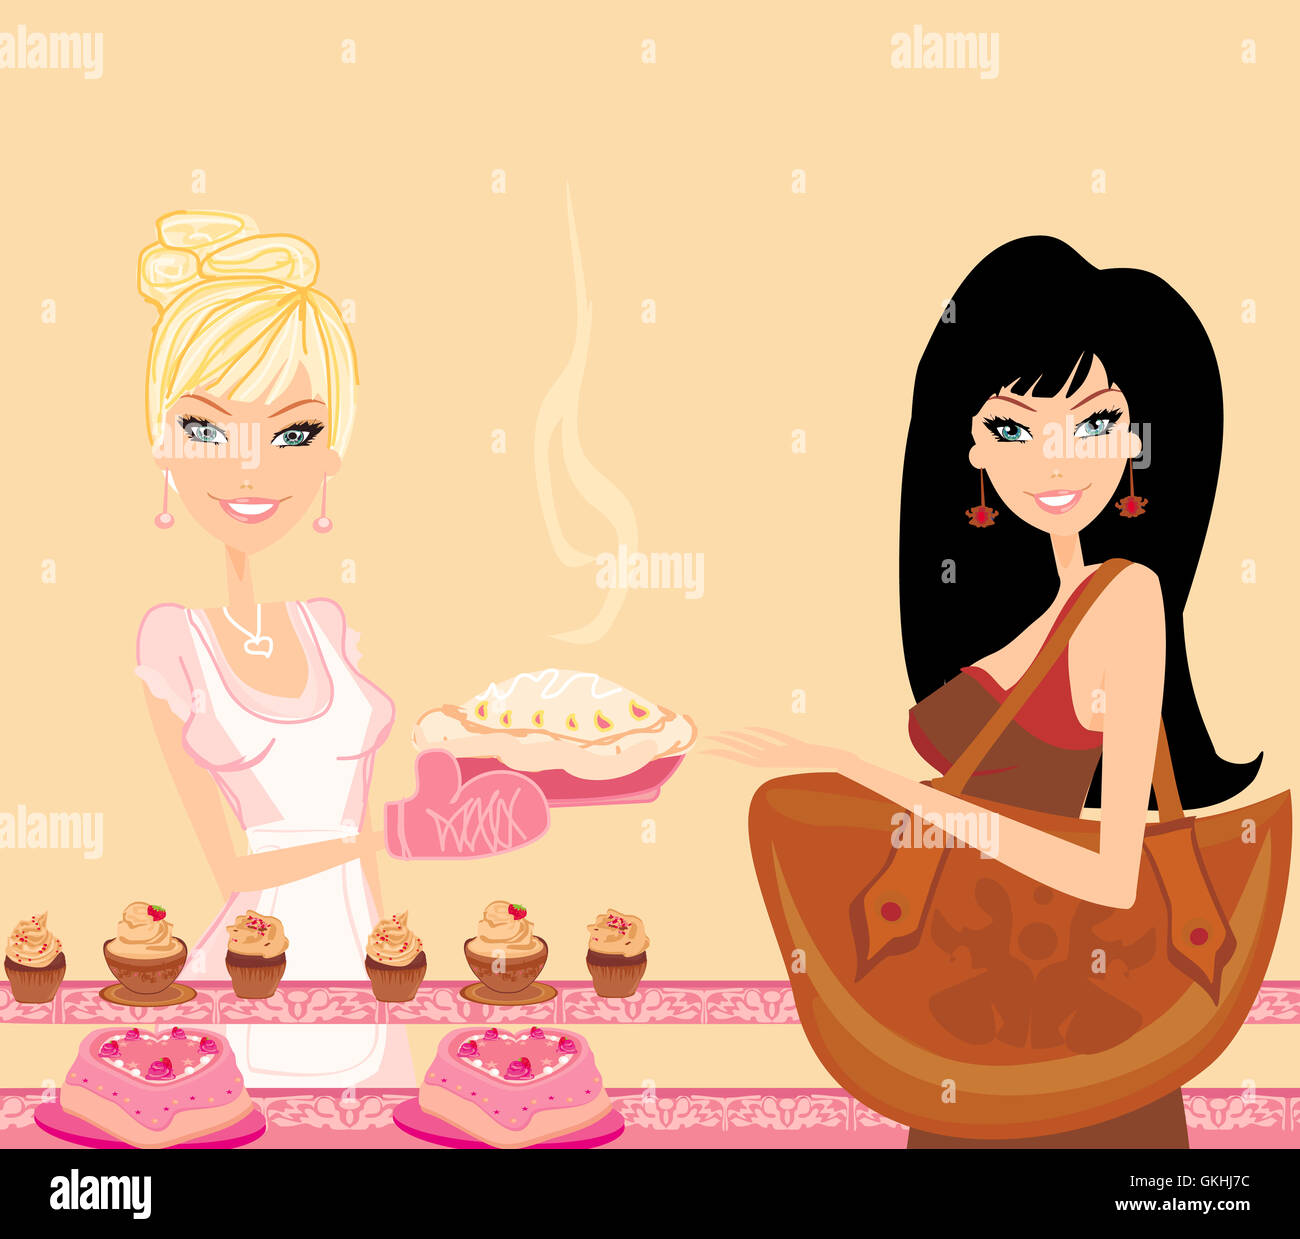 illustration of a woman buying cake at a bakery store Stock Photo